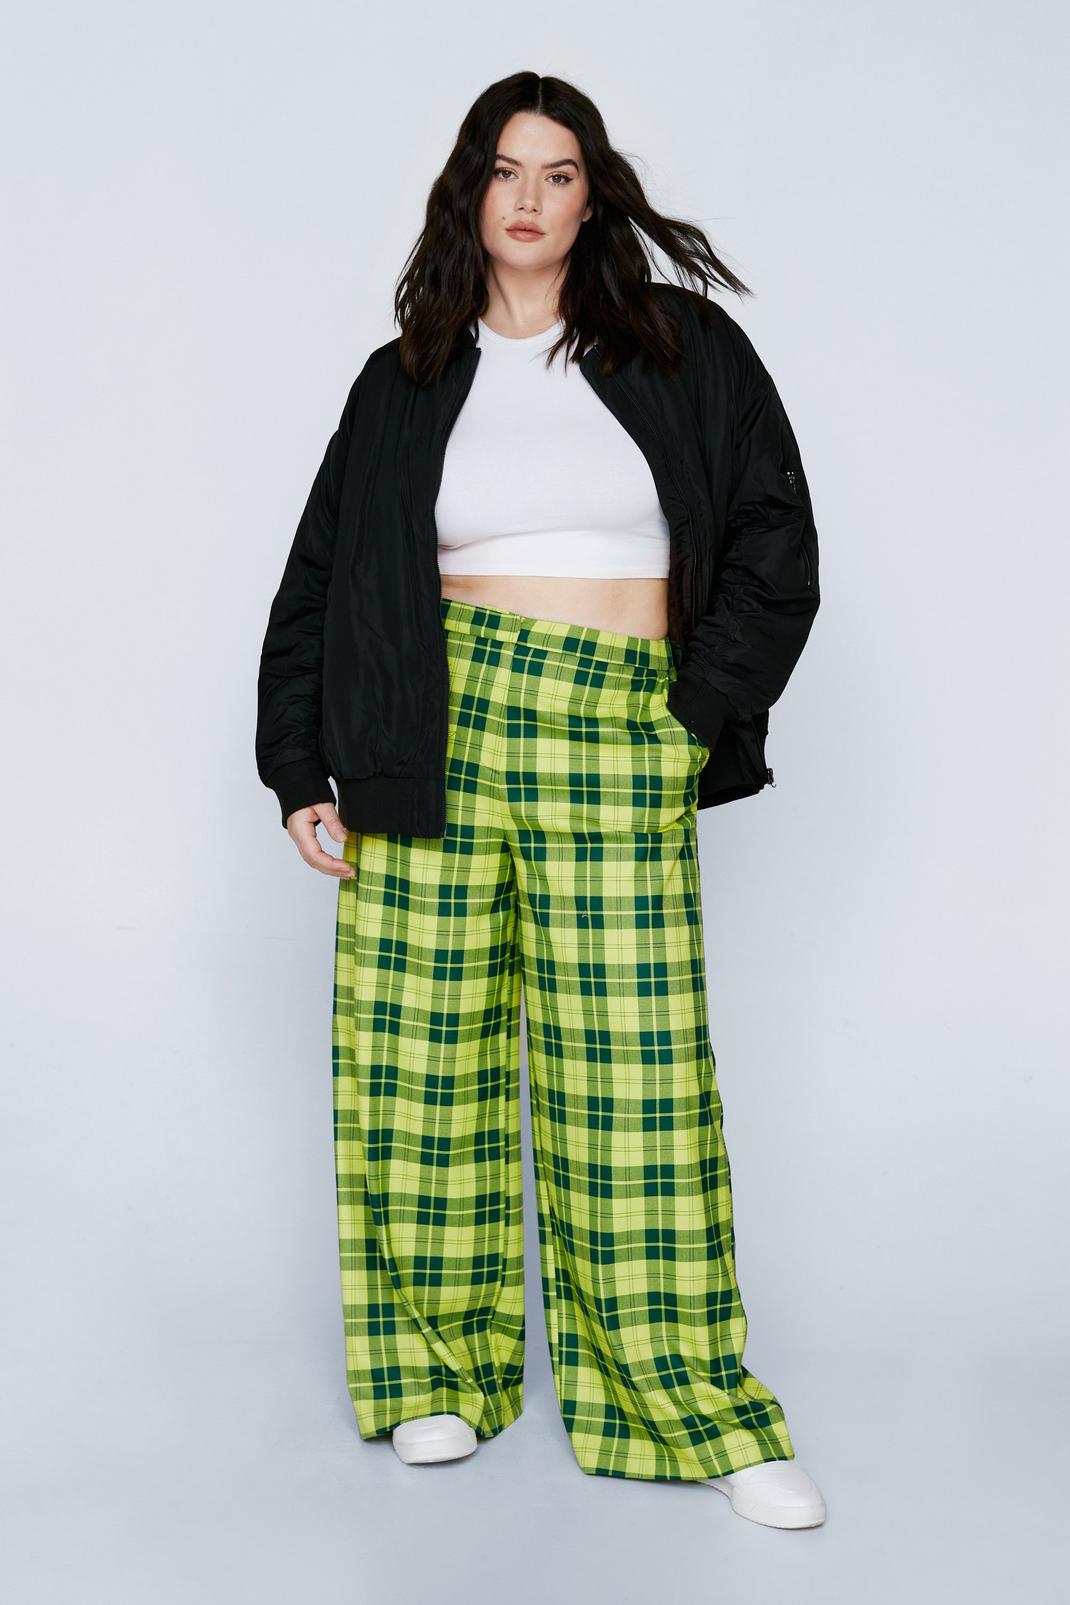 Korean Style Plaid Wide Leg Pants For Women Plus Size, High Waist,  Oversized Checkered Checked Trousers Women For Summer 210707 From Lu003,  $43.27